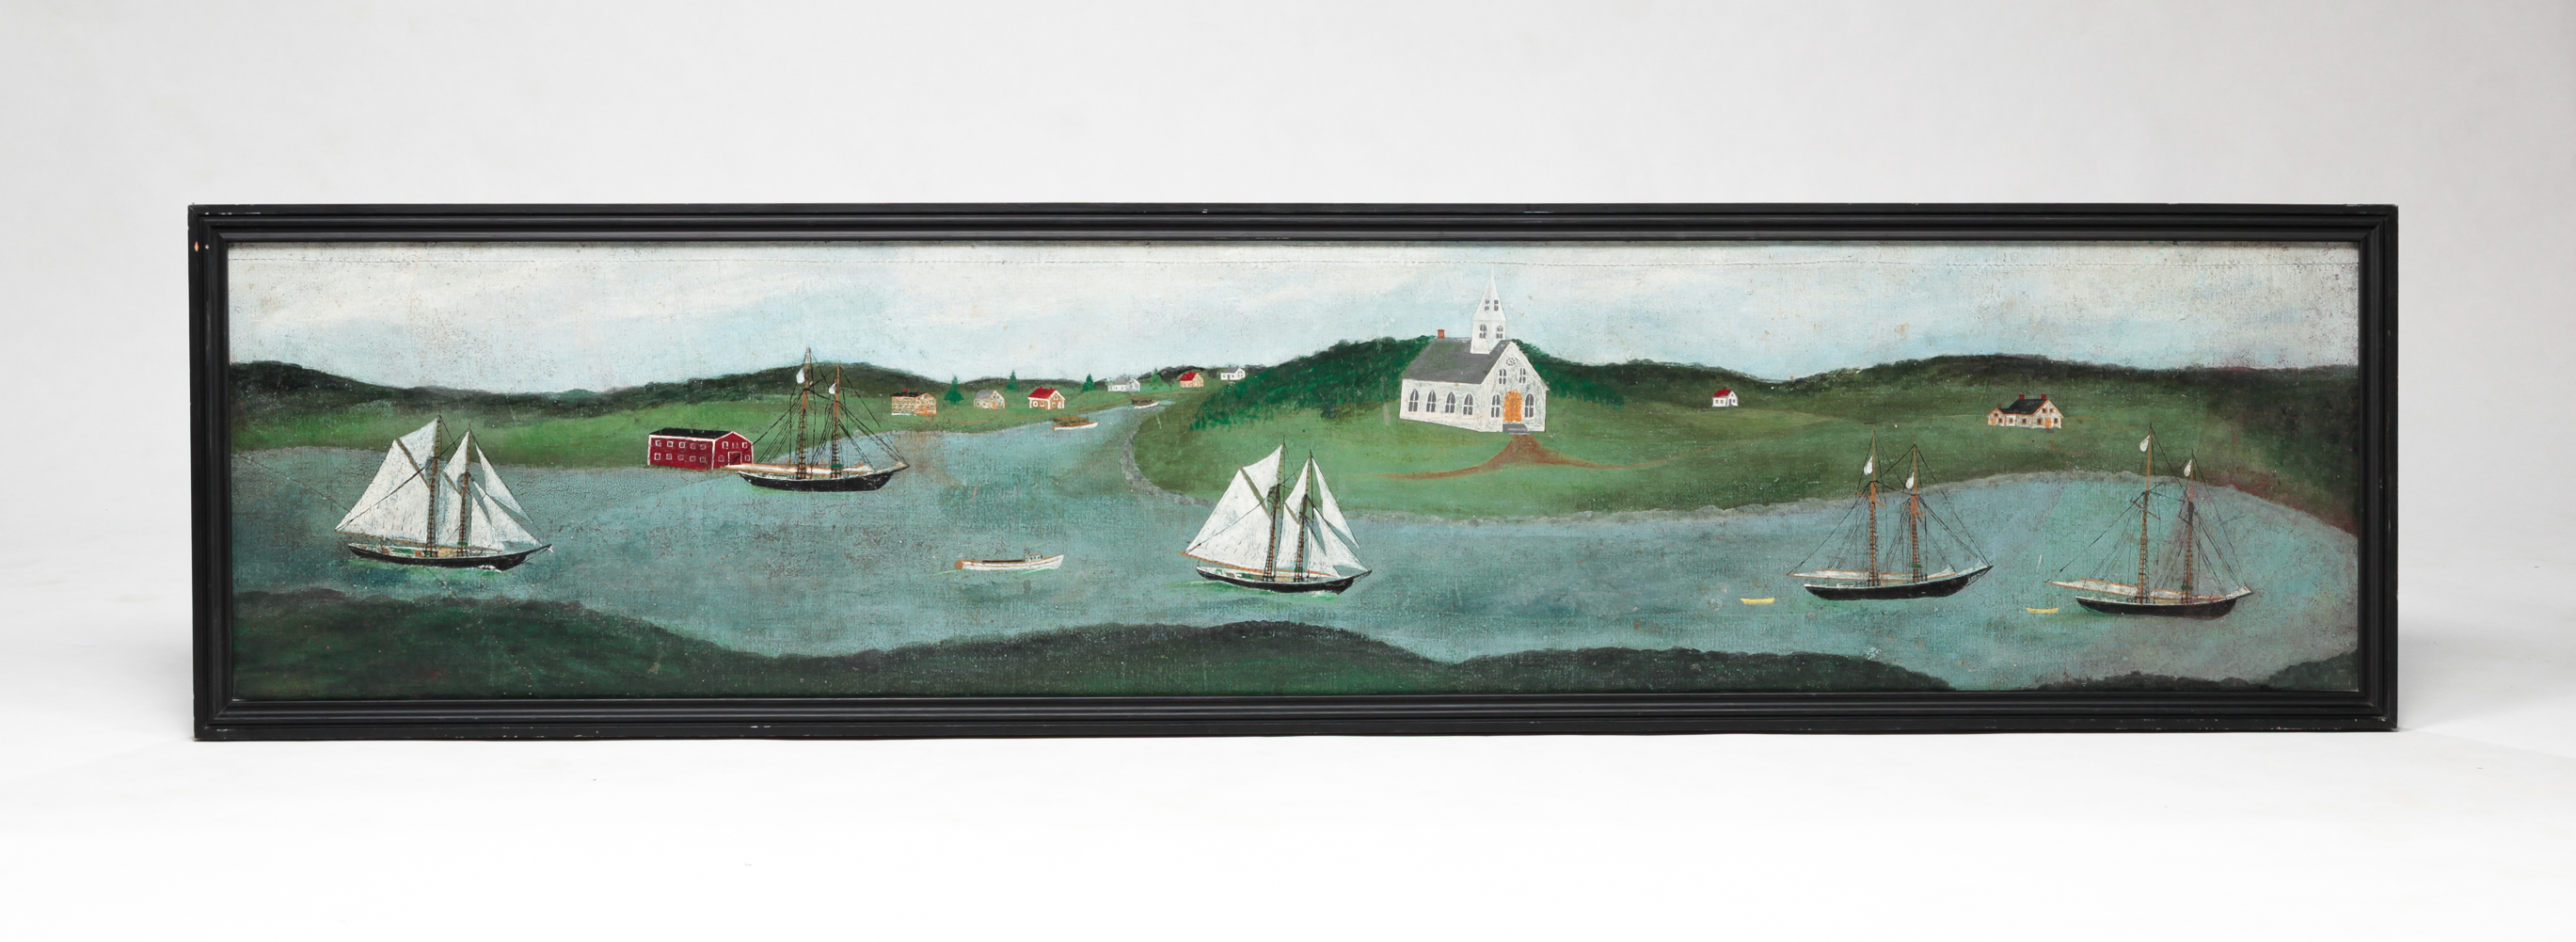 AMERICAN FOLK ART RIVERSCAPE WITH